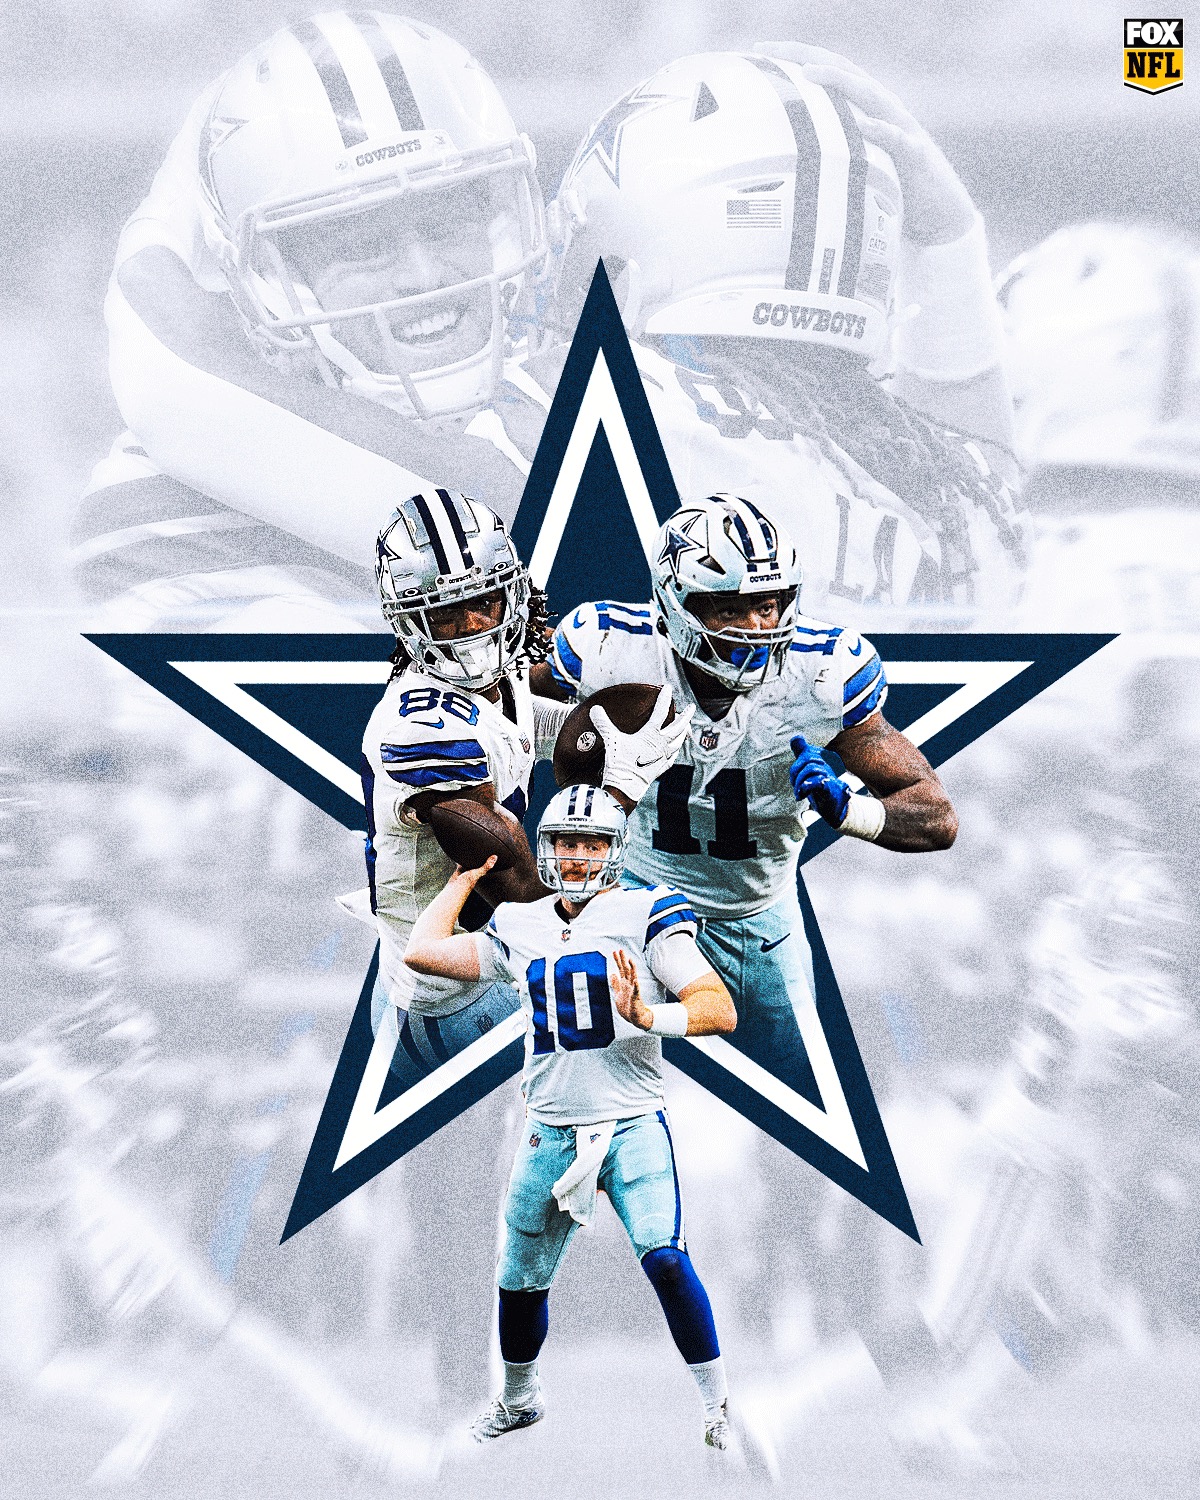 FOX Sports: NFL on X: 'HOW BOUT THEM COWBOYS!? The @dallascowboys